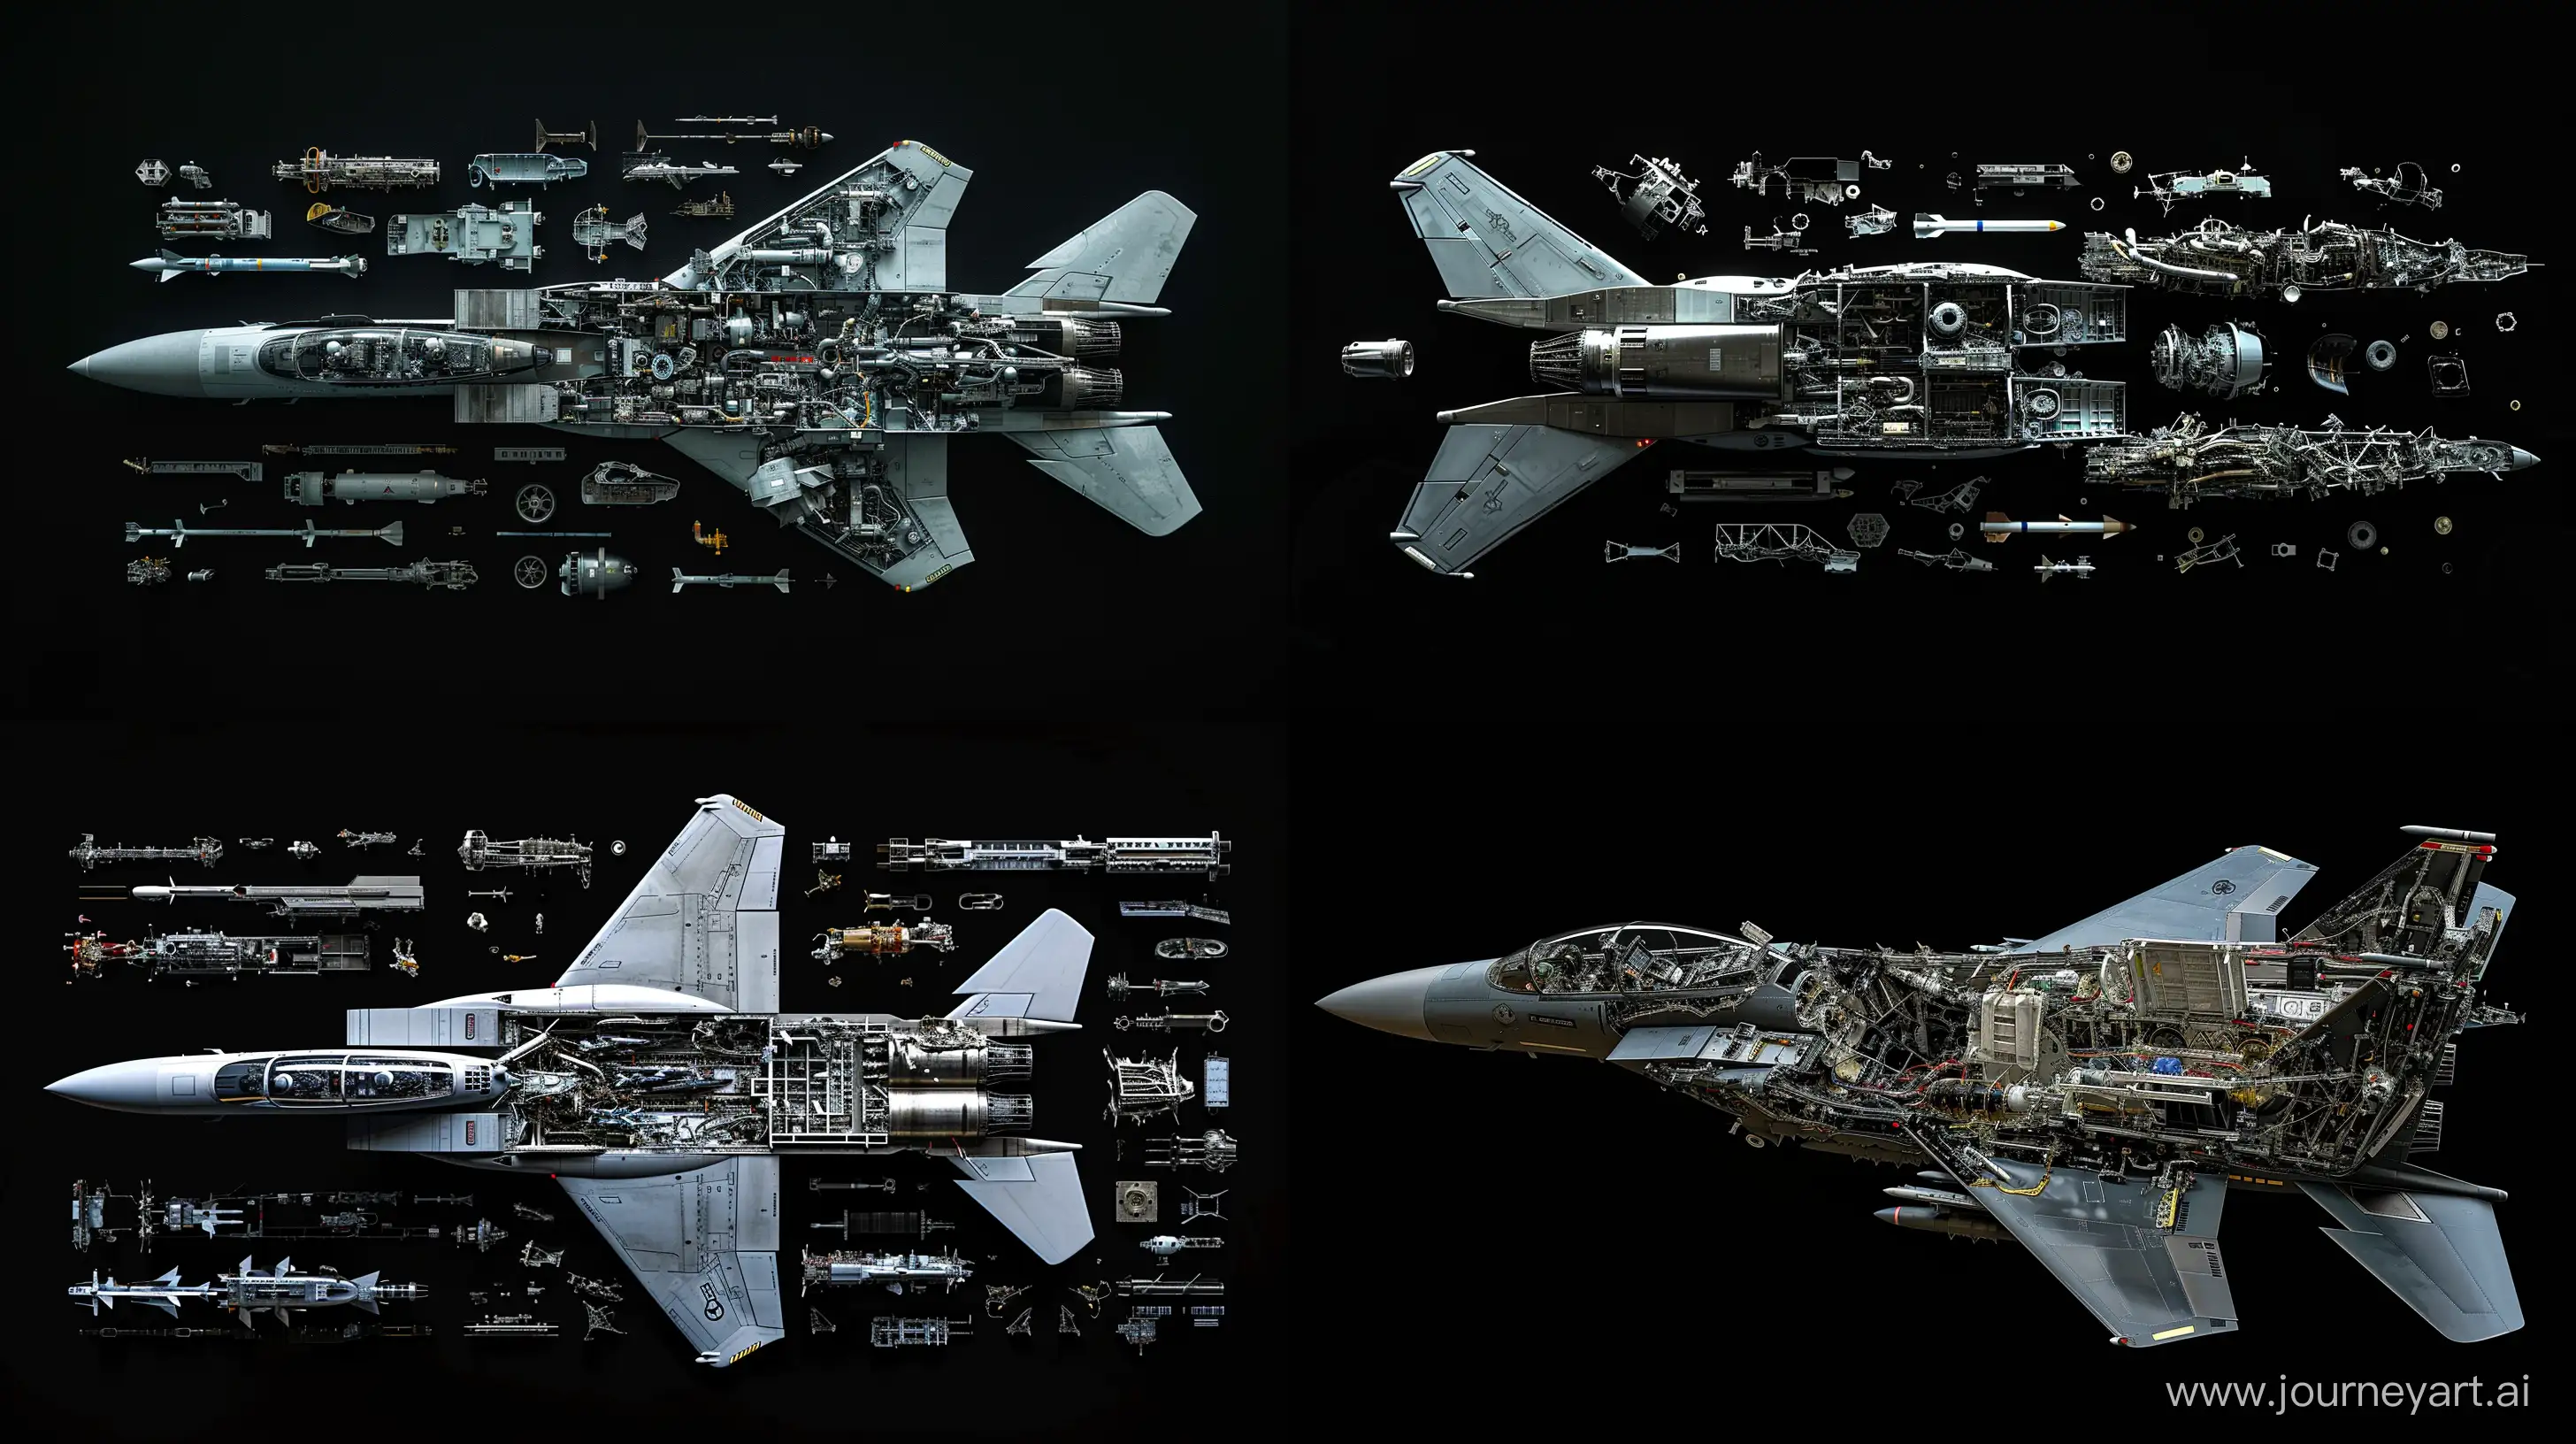 Ultra-realistic 8K image of a F-15 in an exploded view. The components should be meticulously detailed and appear to float against a black background, highlighting their complexity and precision craftsmanship, hyper-realistic detail --ar 16:9 --v 6.0